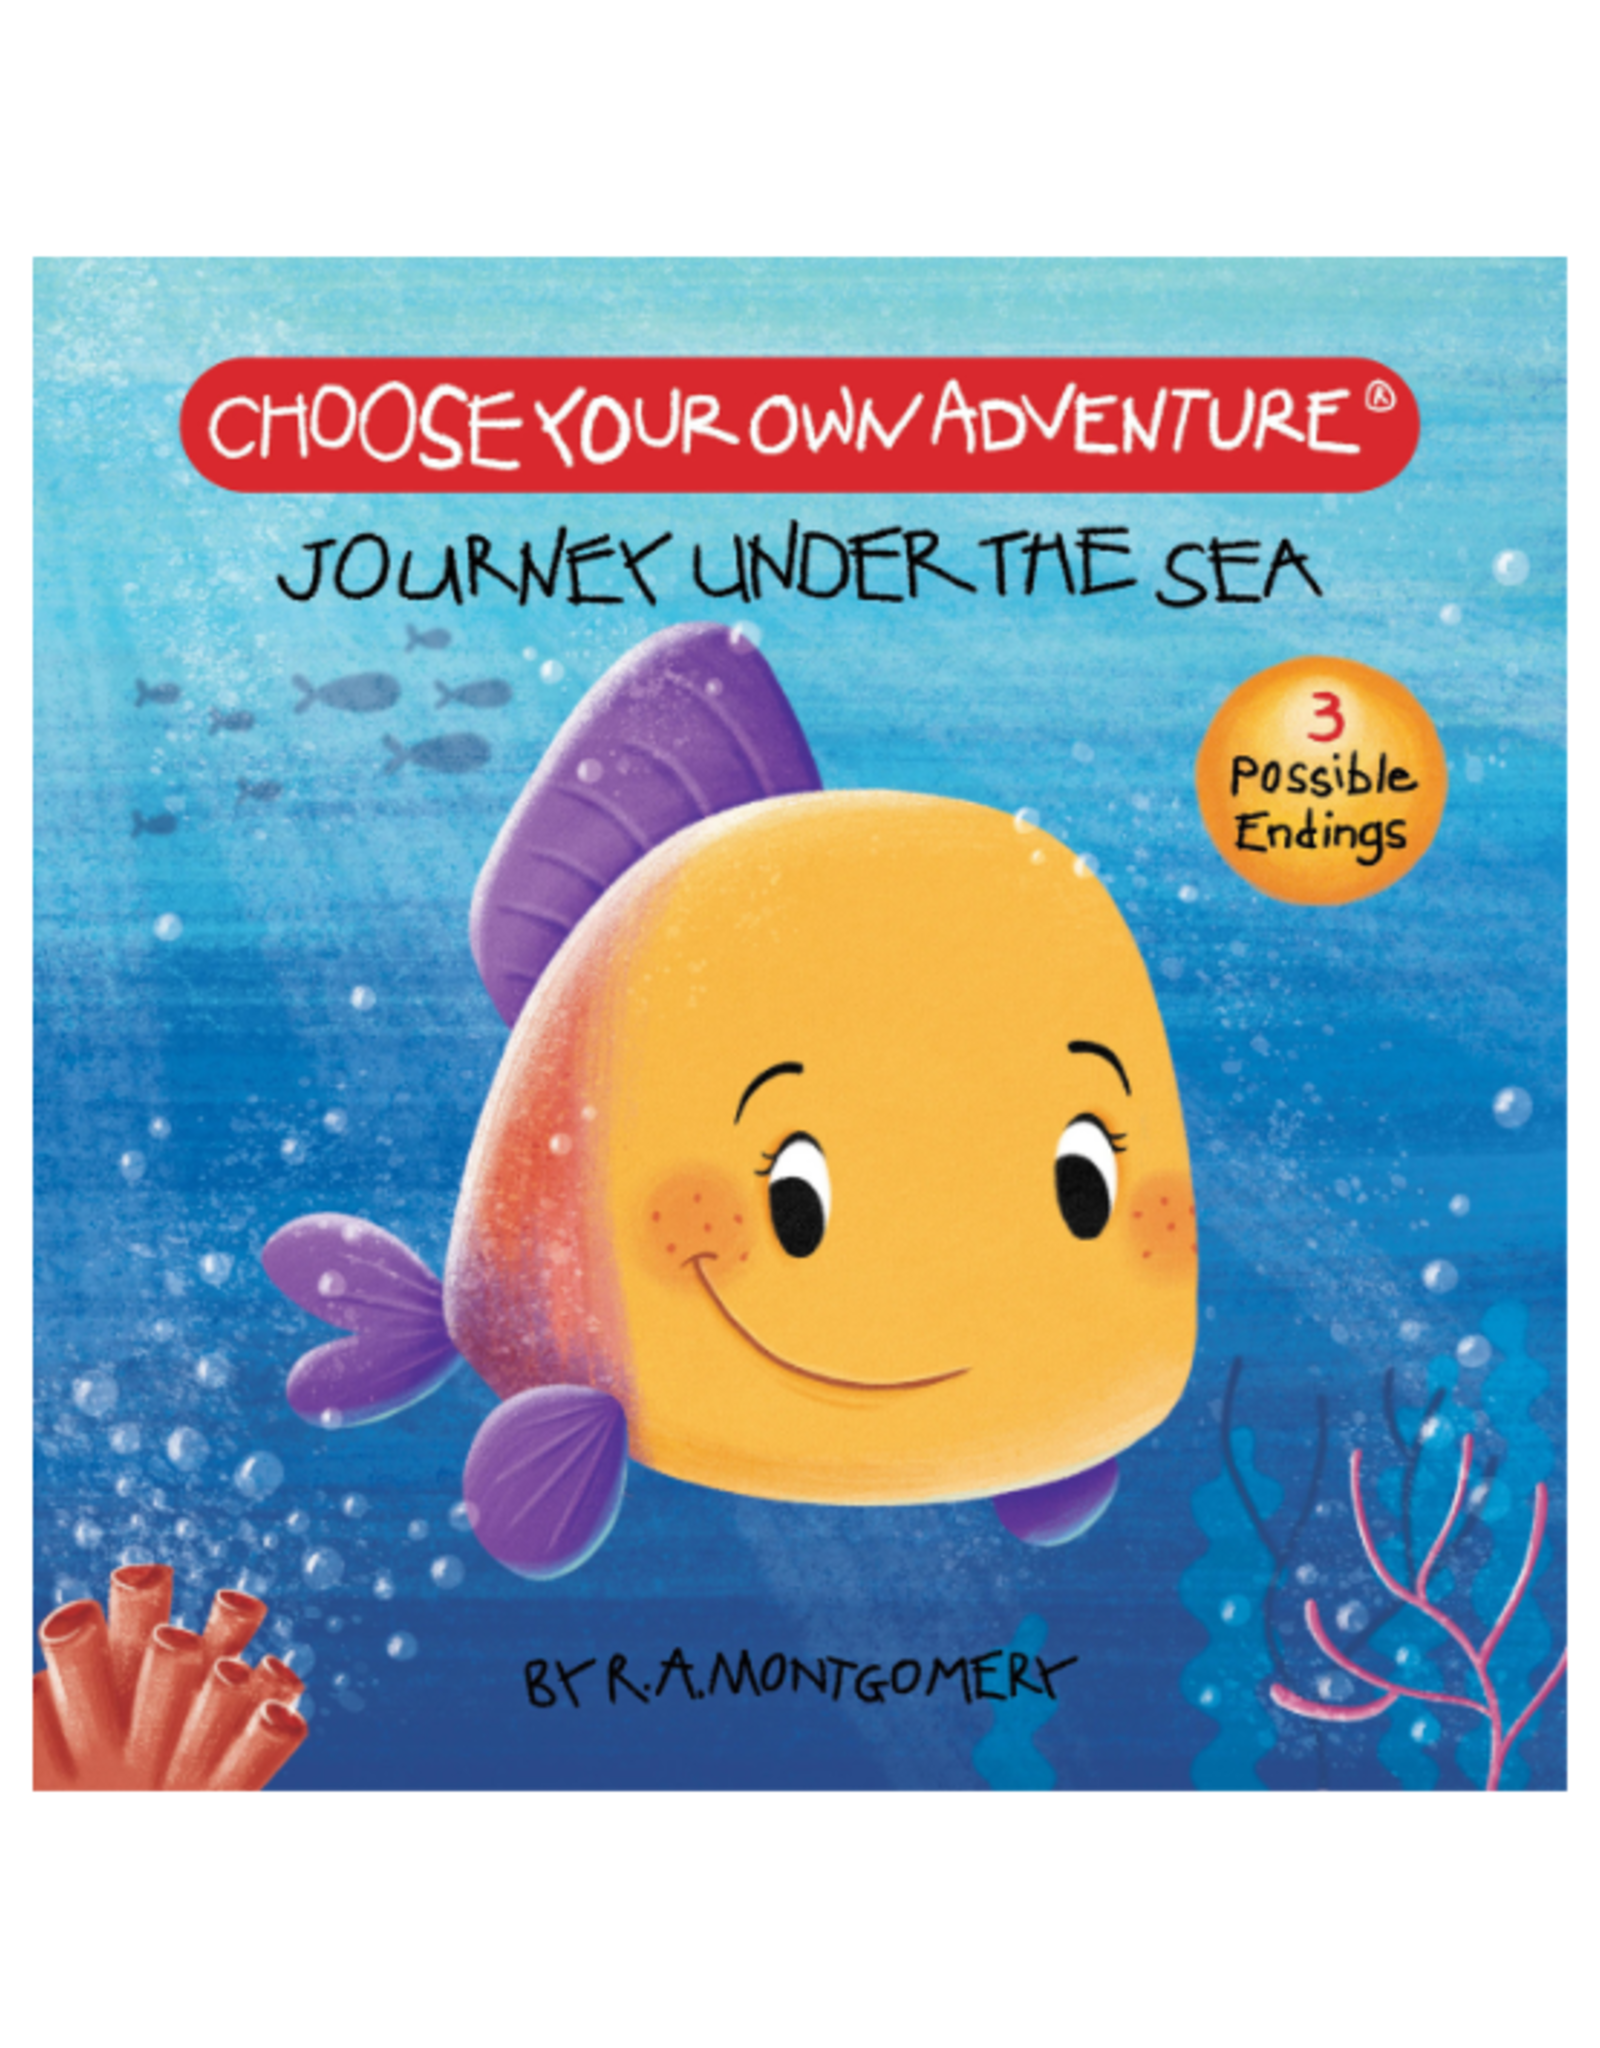 Choose Your Own Adventure Book - Choose Your Own Adventure Board Book - Journey Under the Sea